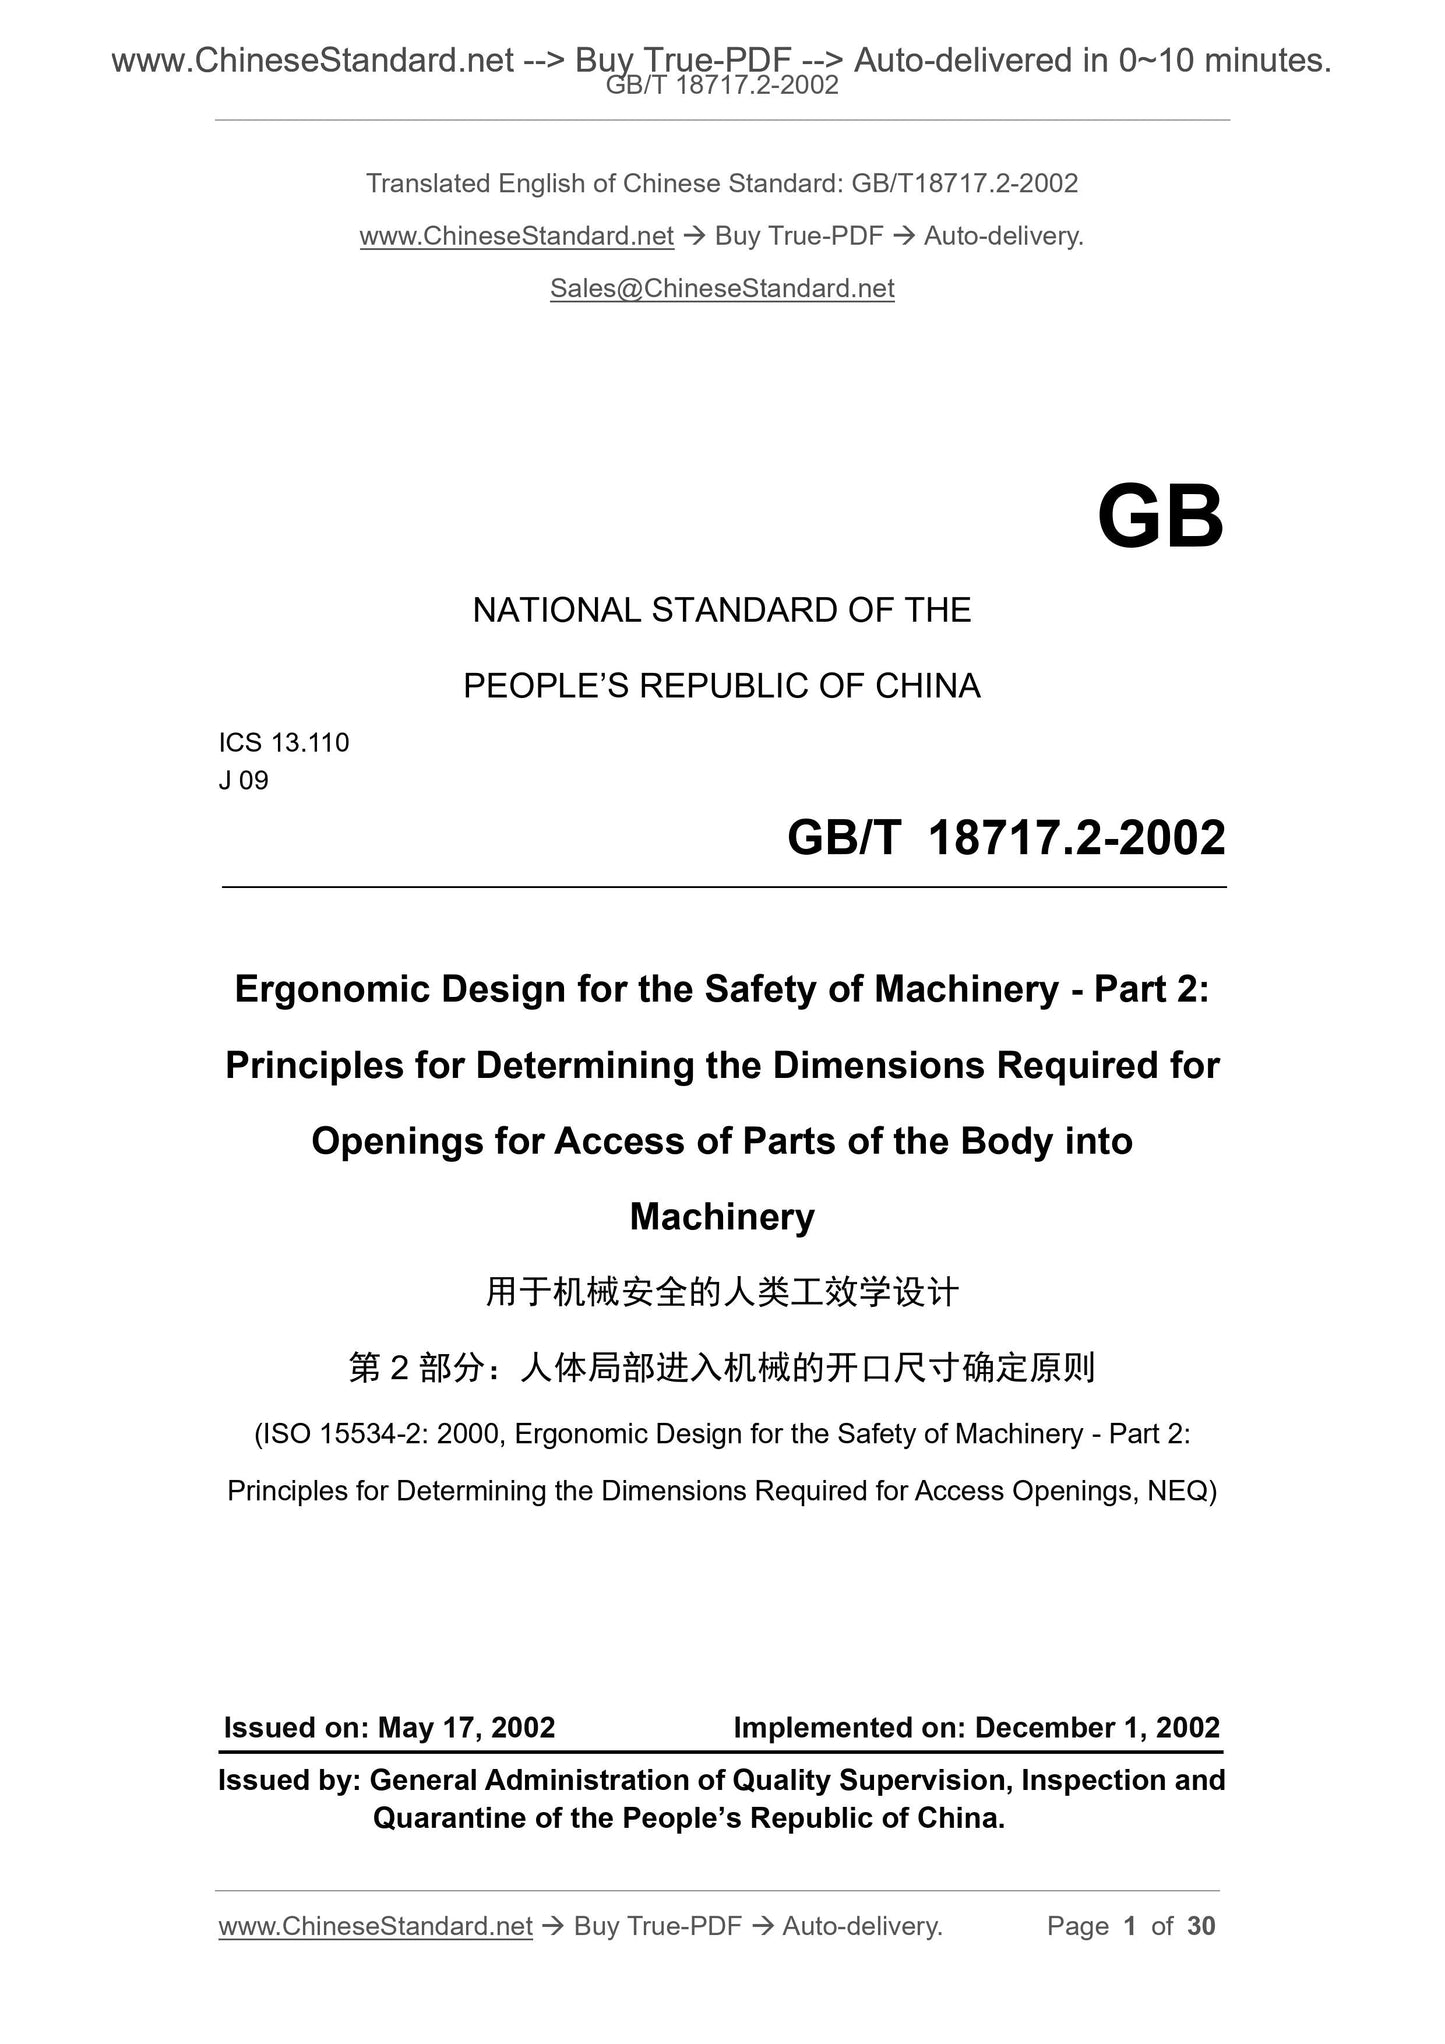 GB/T 18717.2-2002 Page 1